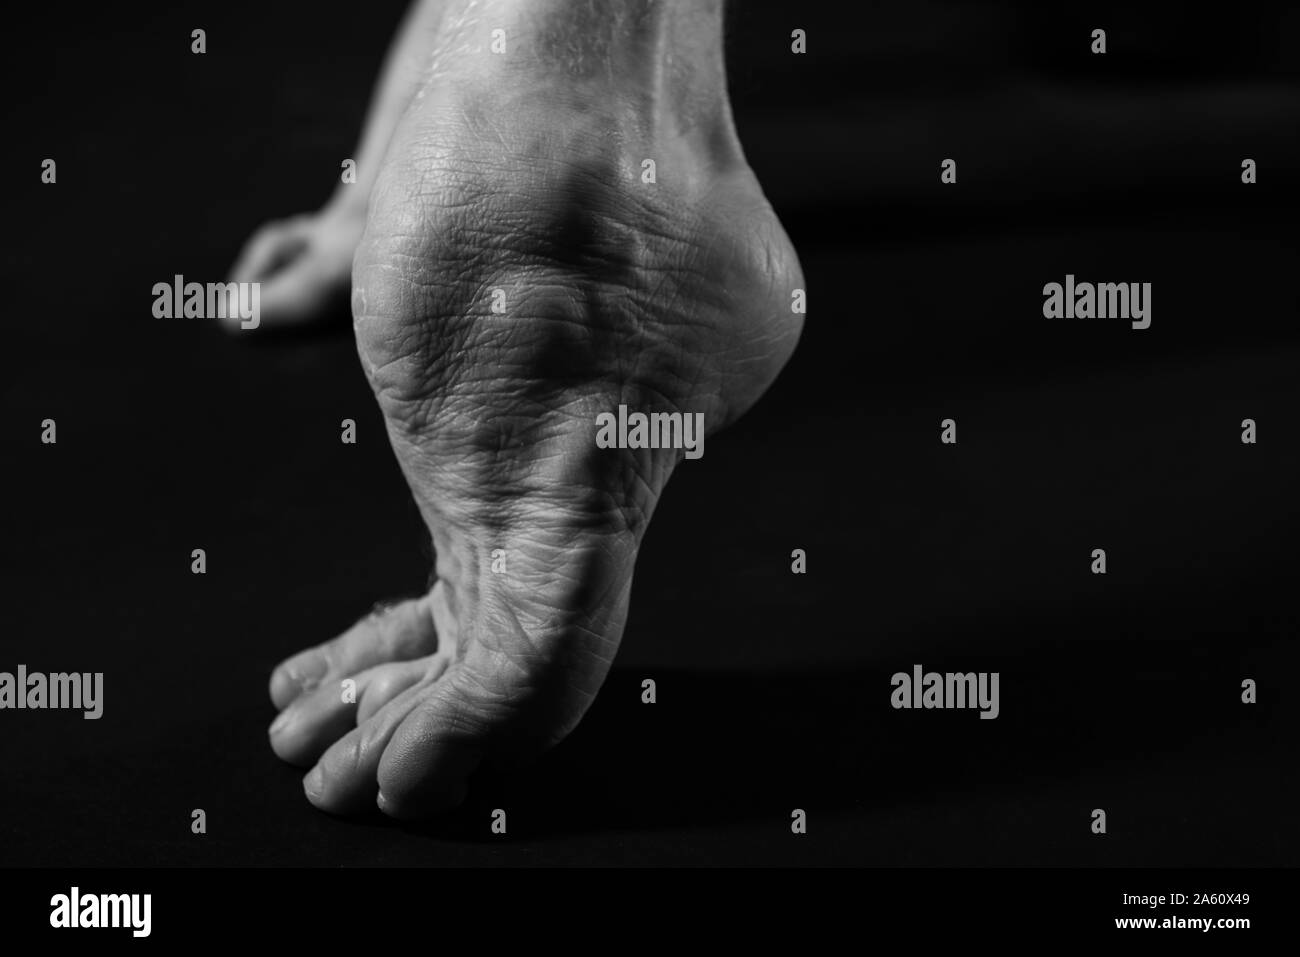 Studio shots of a mans foot with cerebral palsy to show the world how he is able to move and work as a life model and dancer despite his disability. Stock Photo